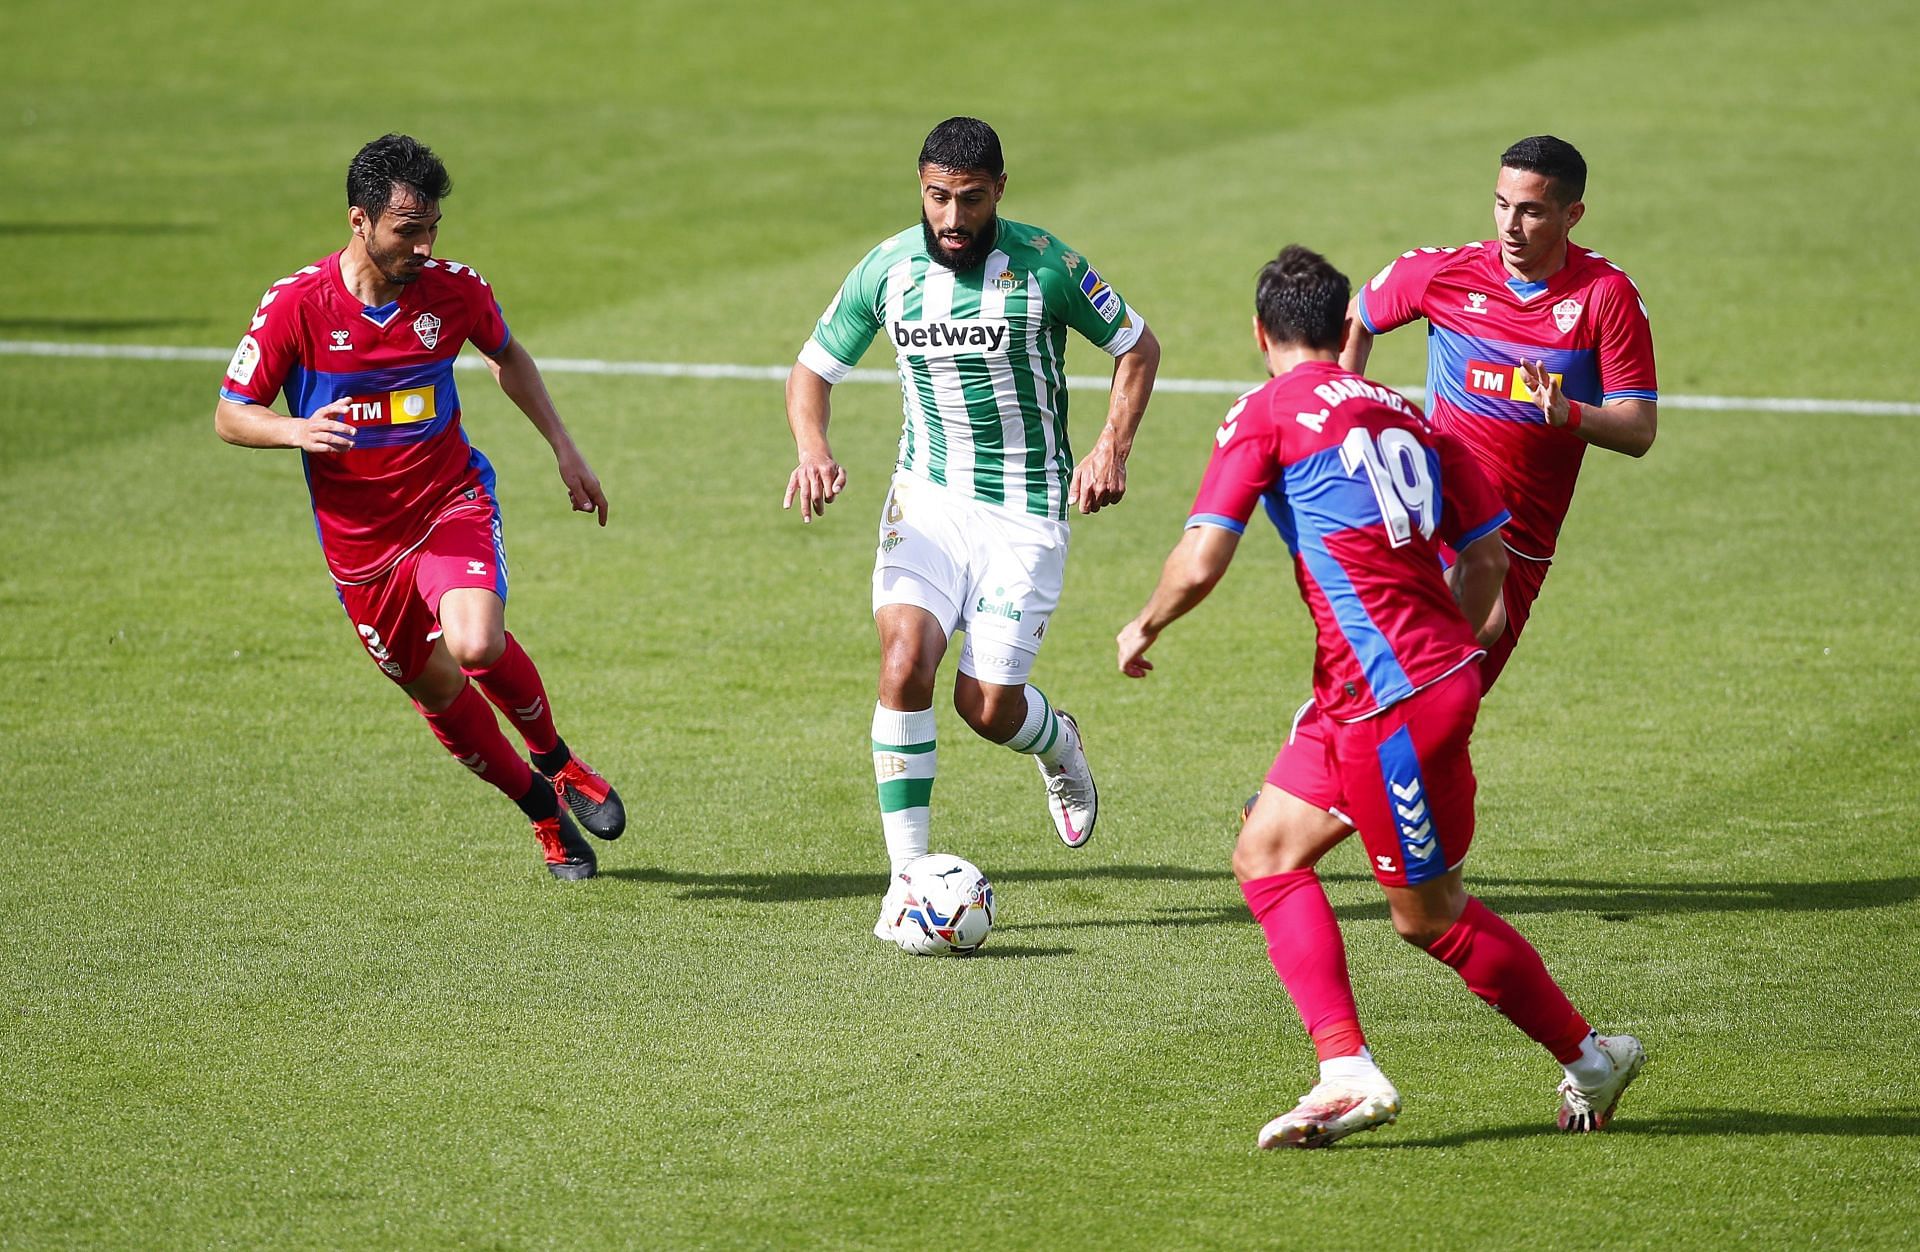 Real Betis take on Elche this weekend